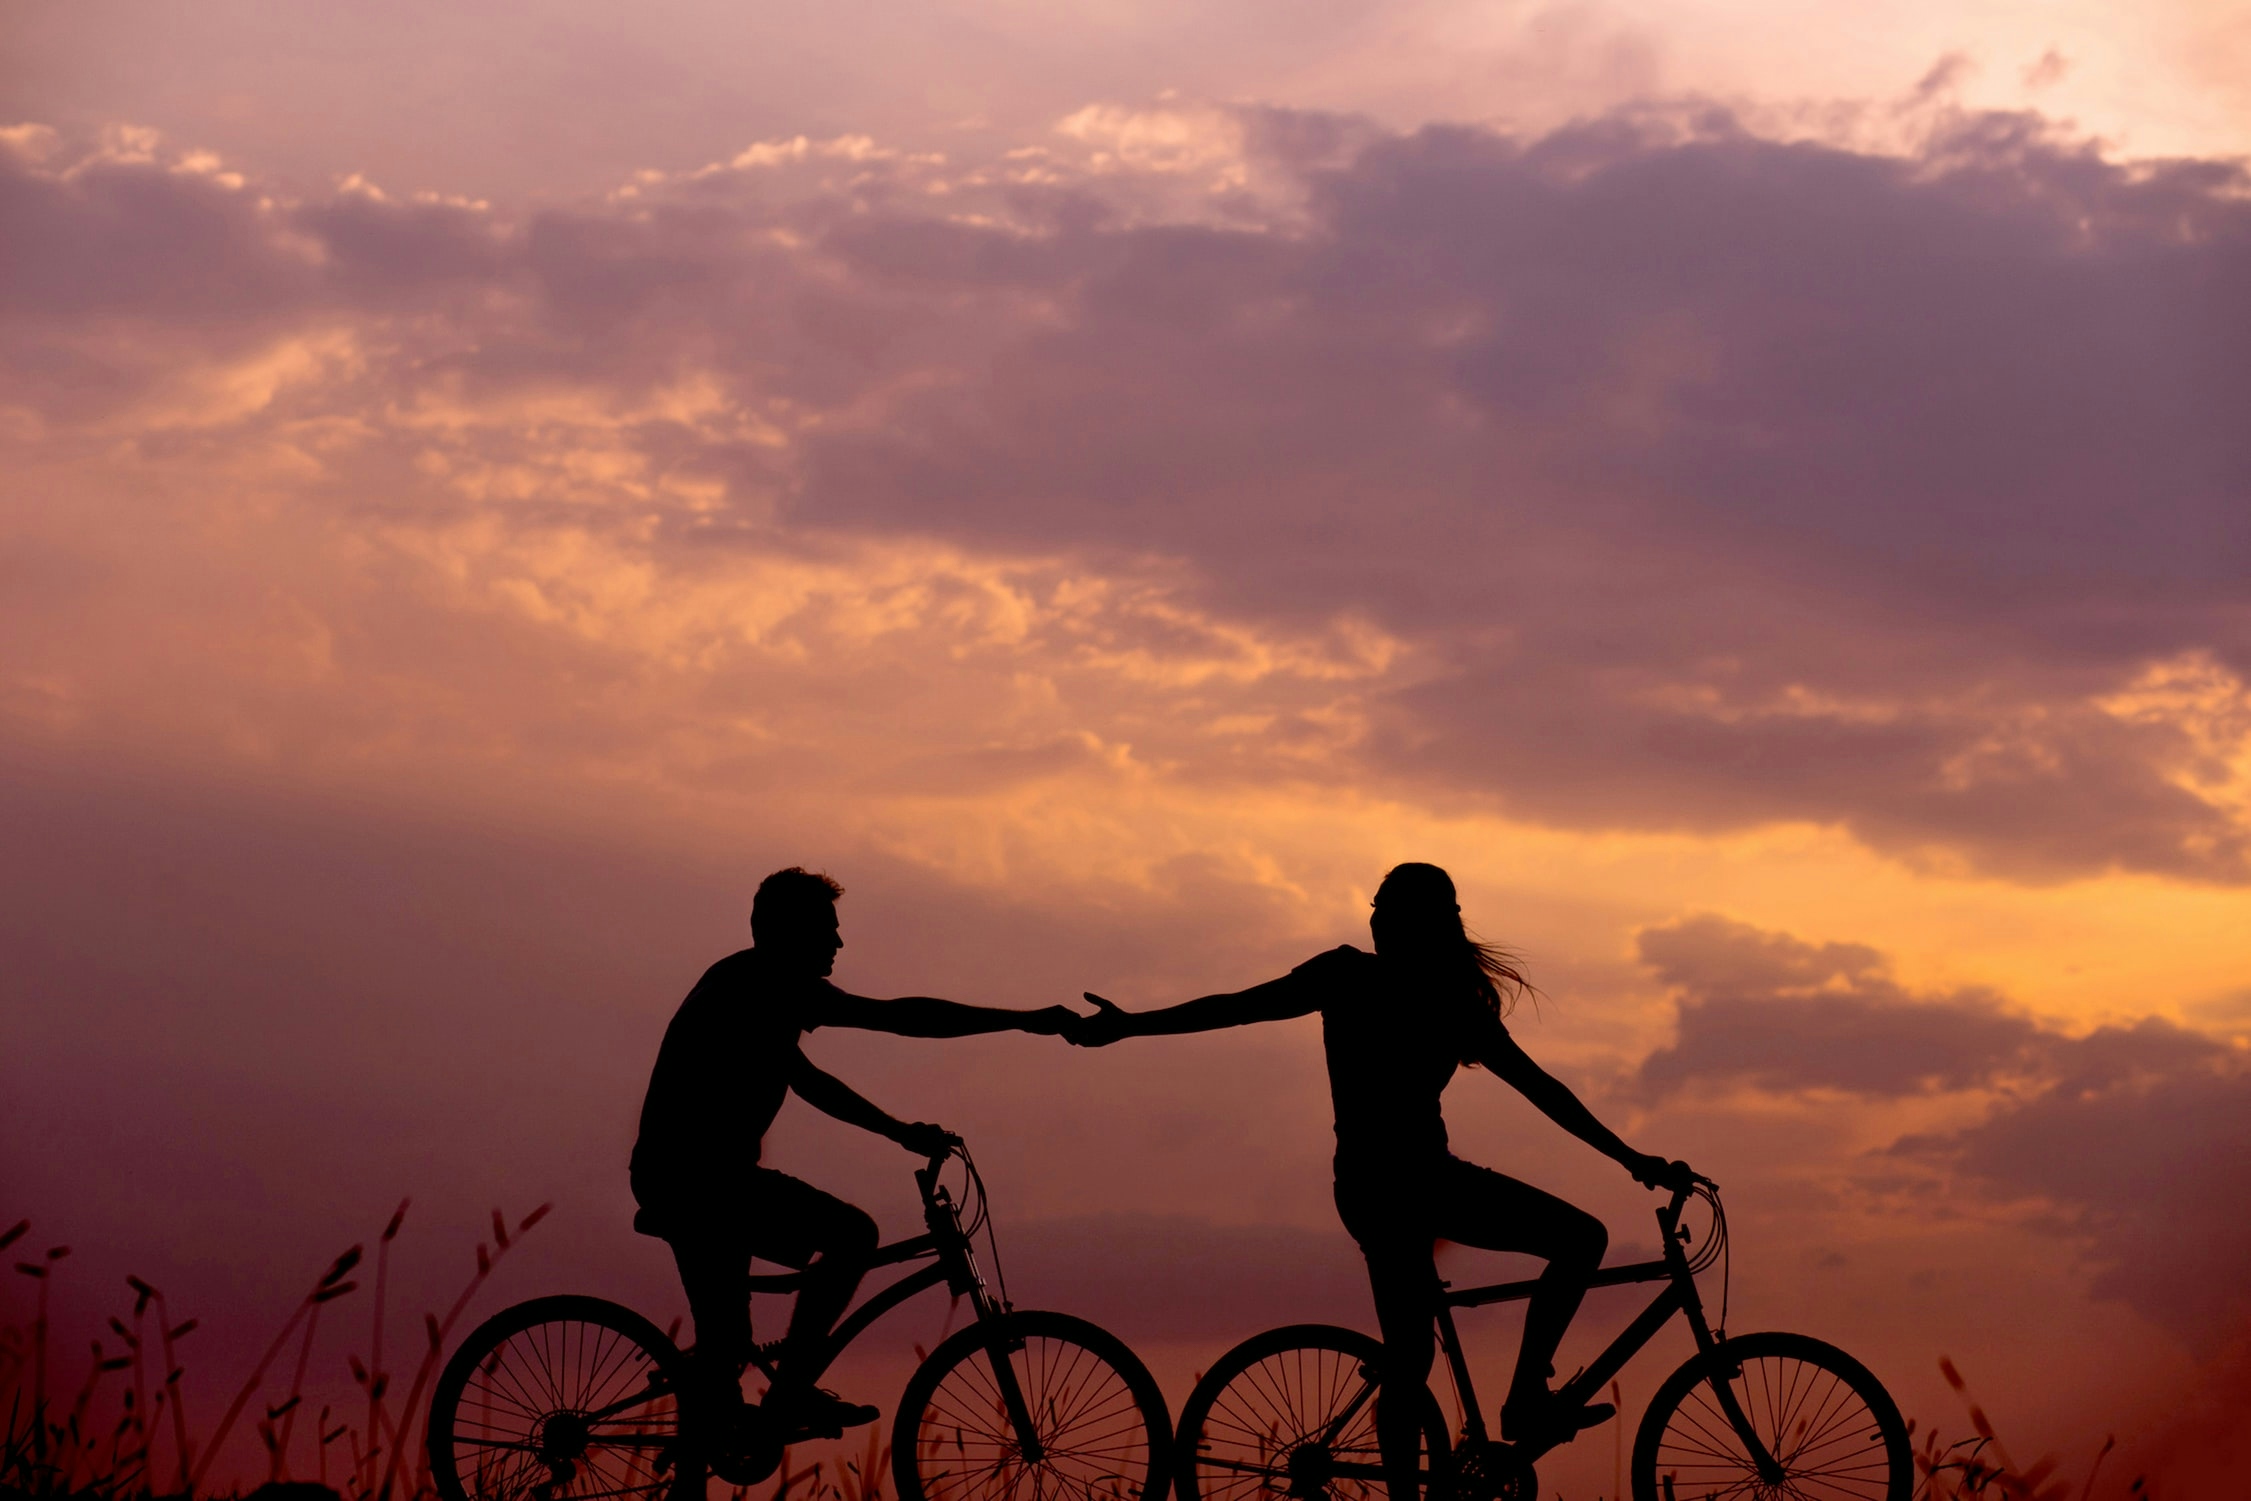 A couple riding bikes and reaching for each other